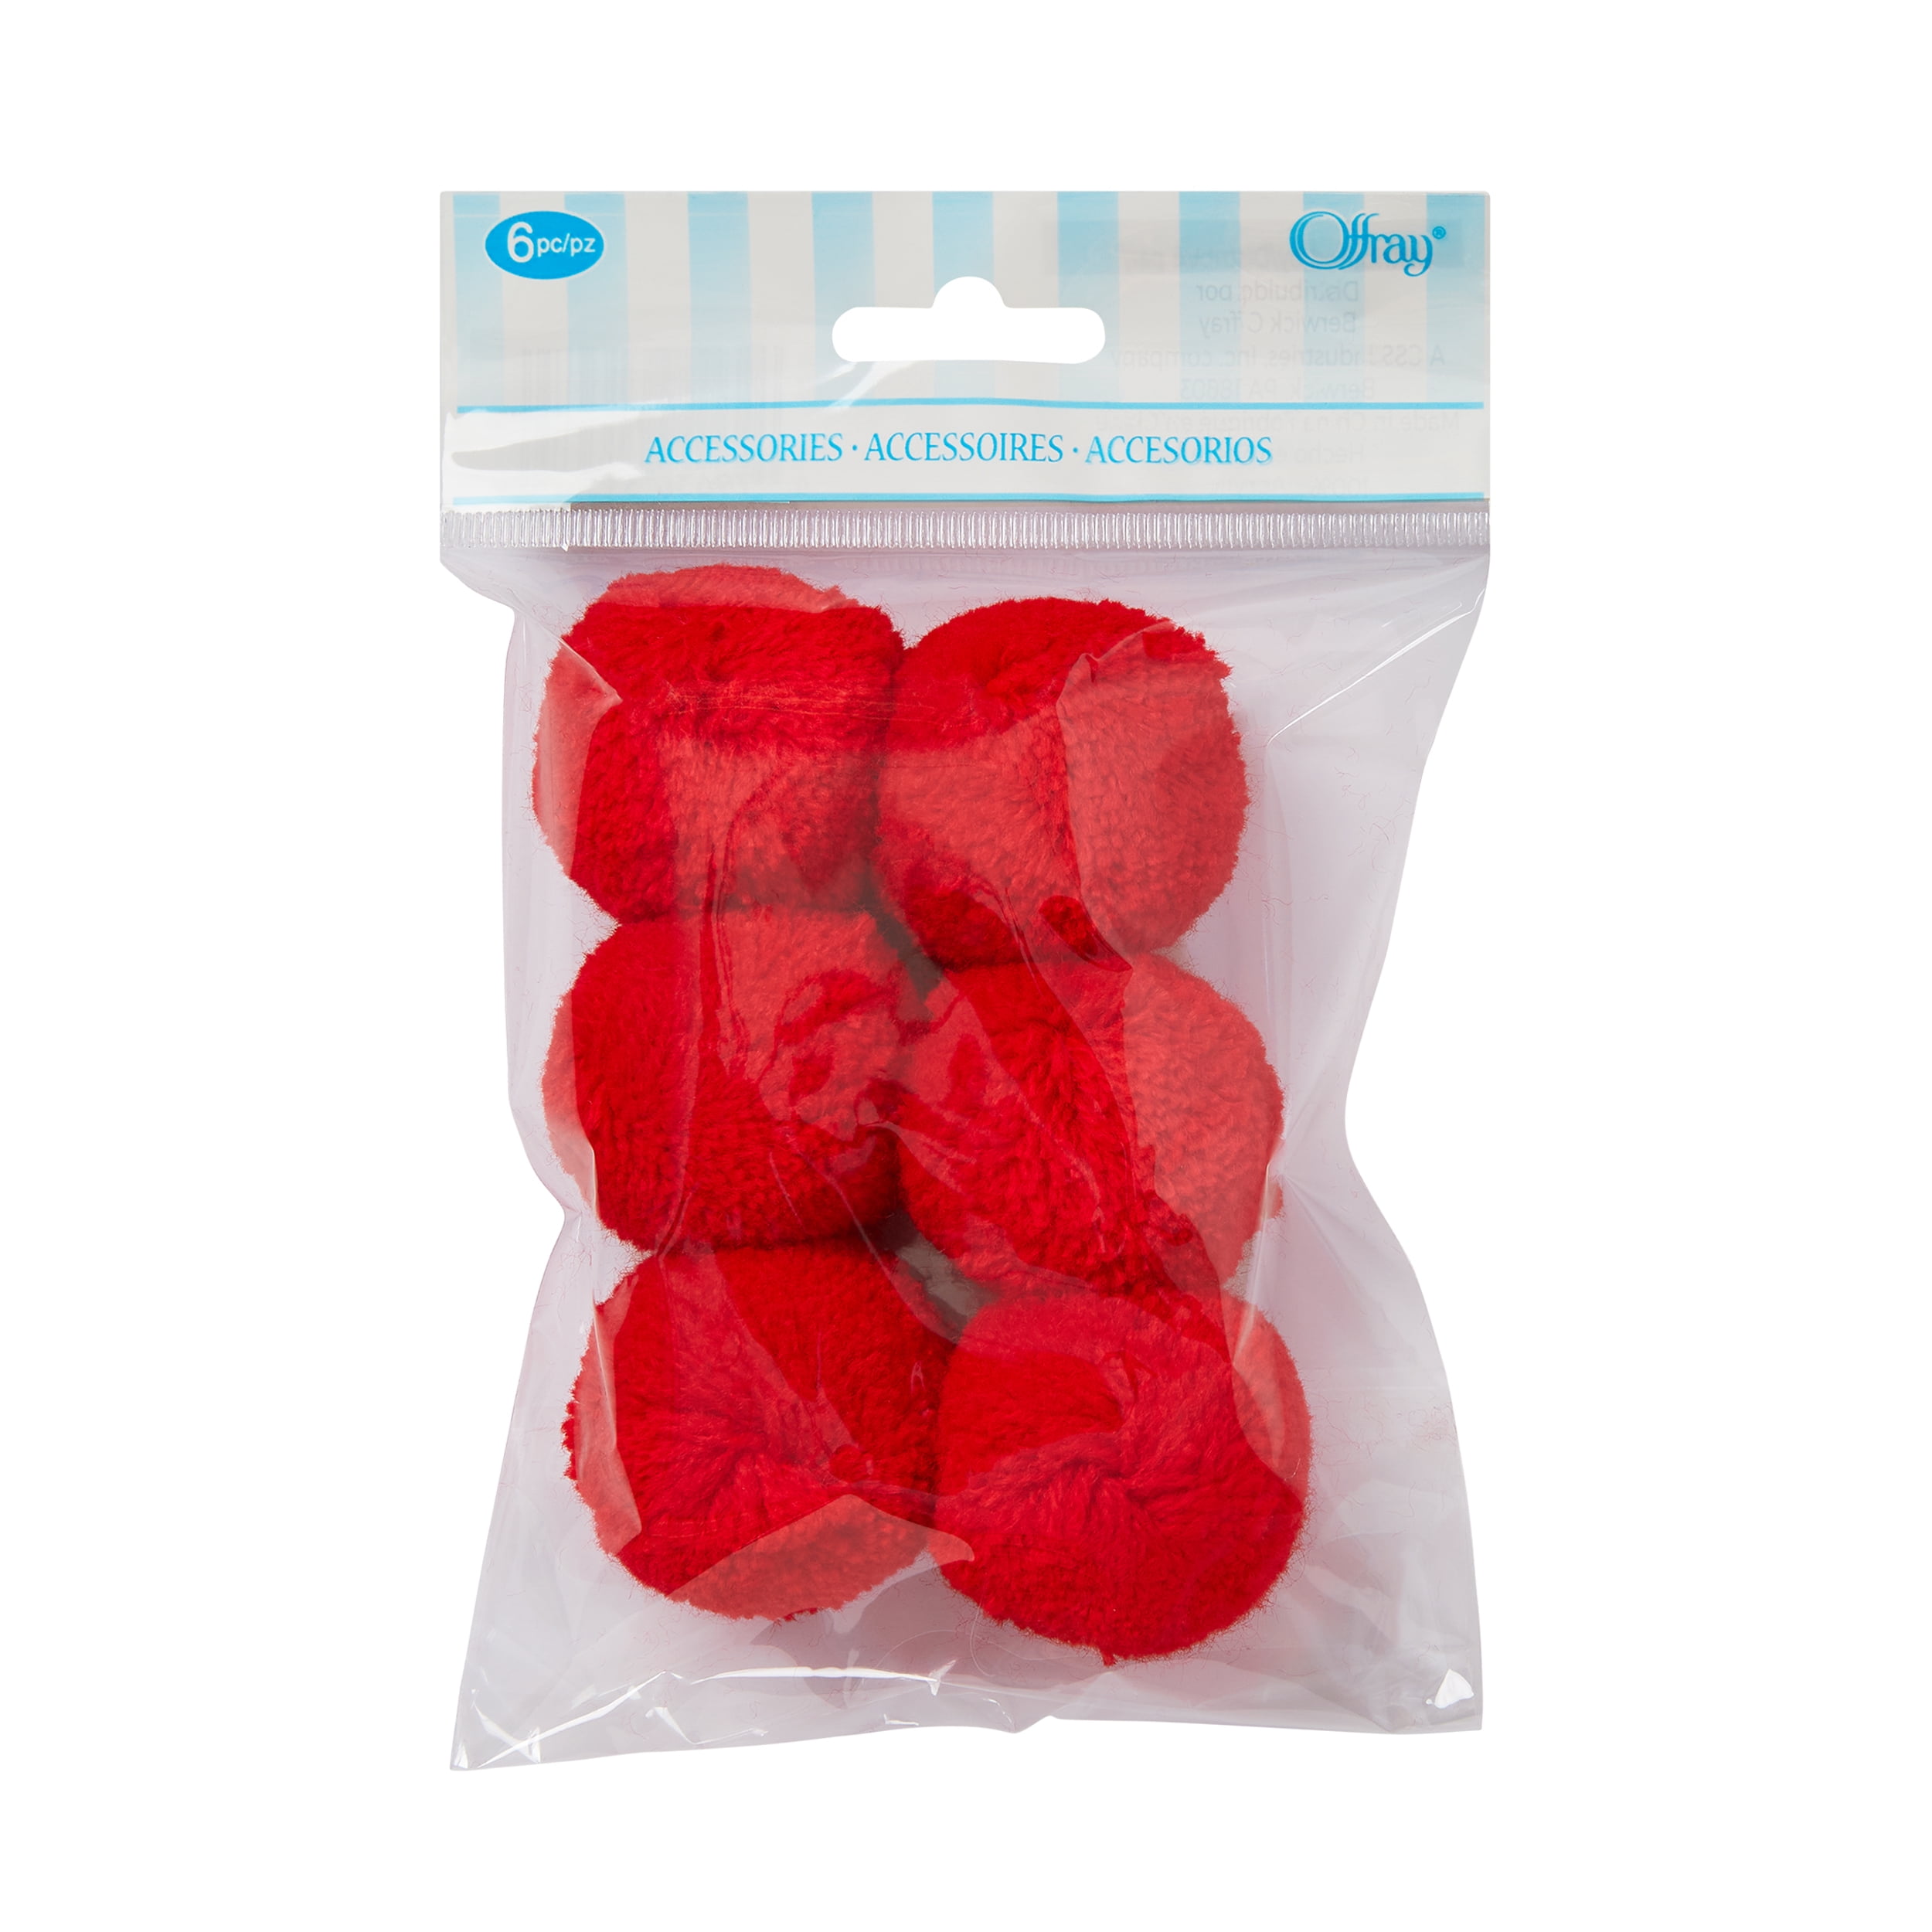 Nicole Pom Poms 1/2 Acrylic 100 Pcs Red #8514 Crafting Crafts Sewing  Christmas